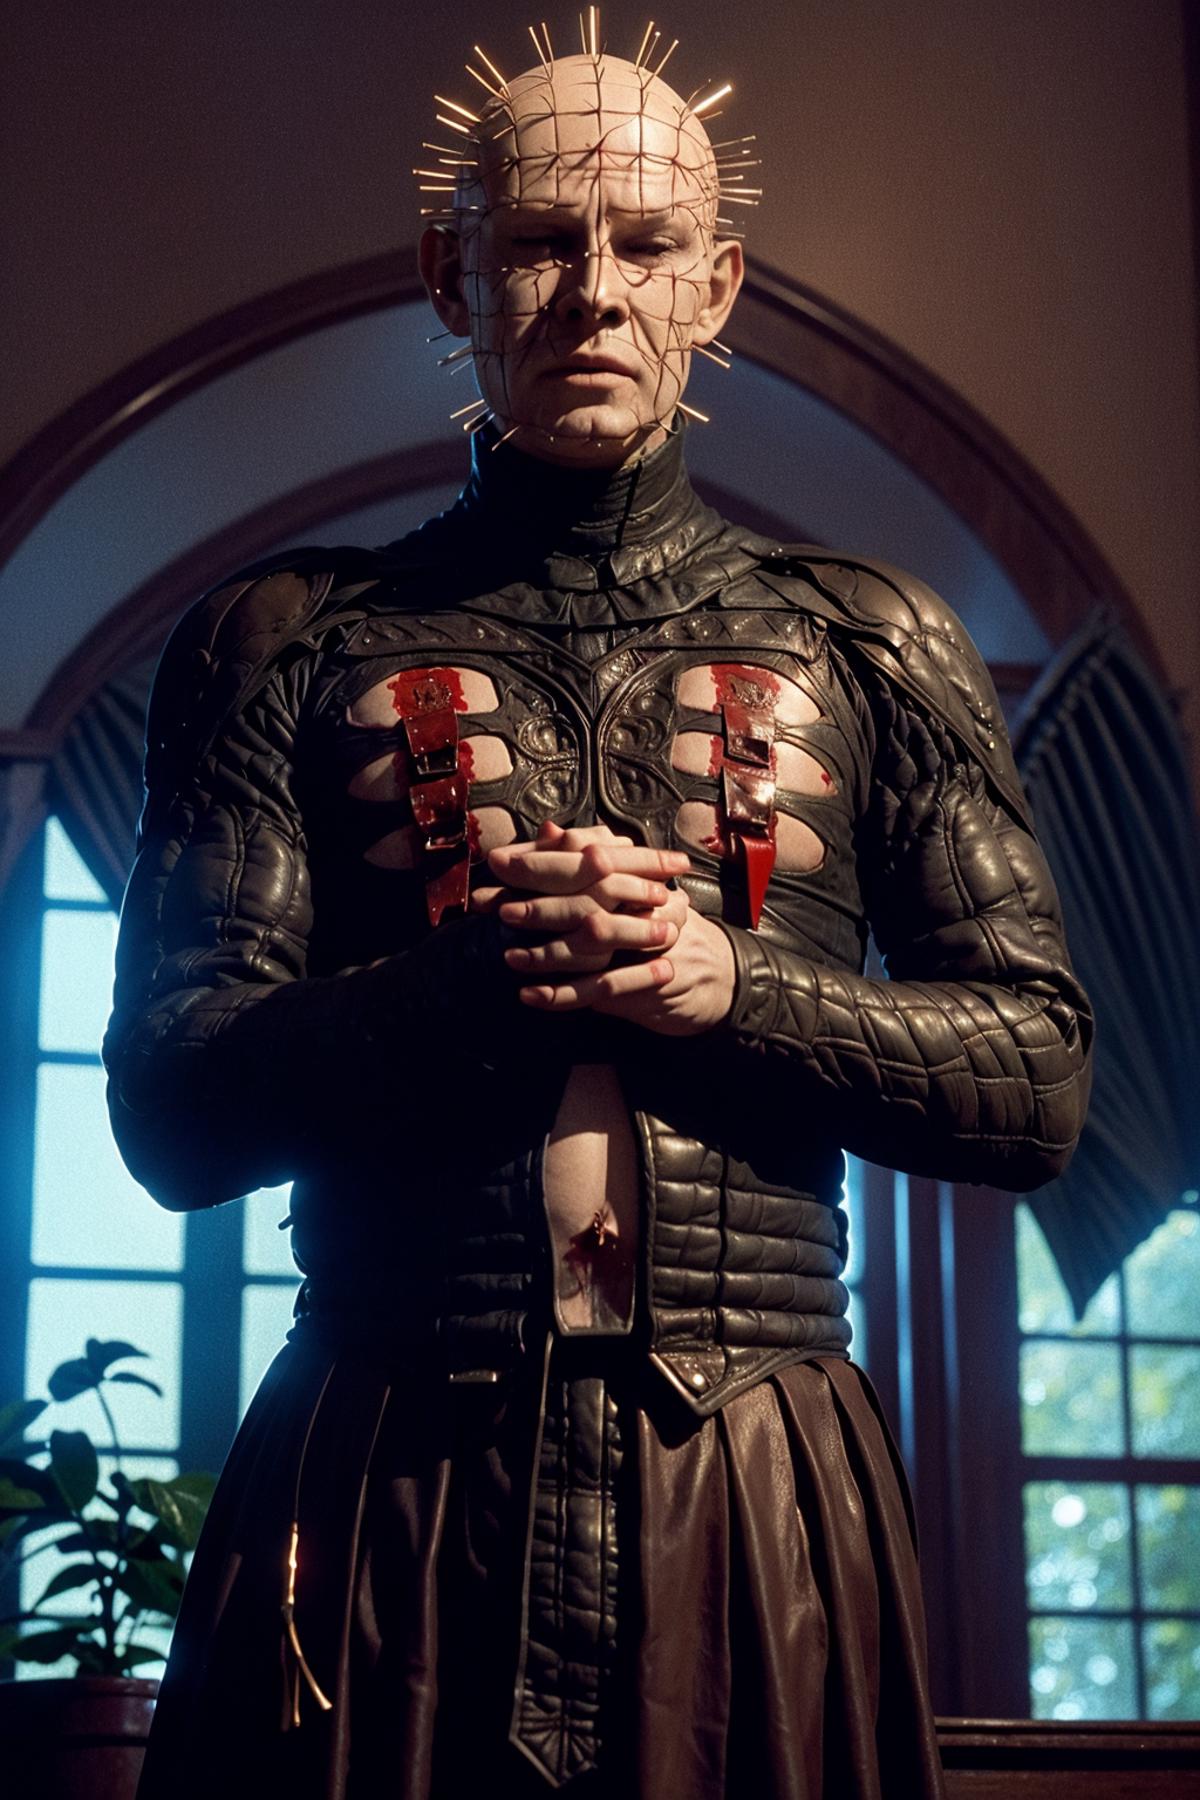 Man with metal spikes in his hands and blood on his chest wearing a black outfit with a split.